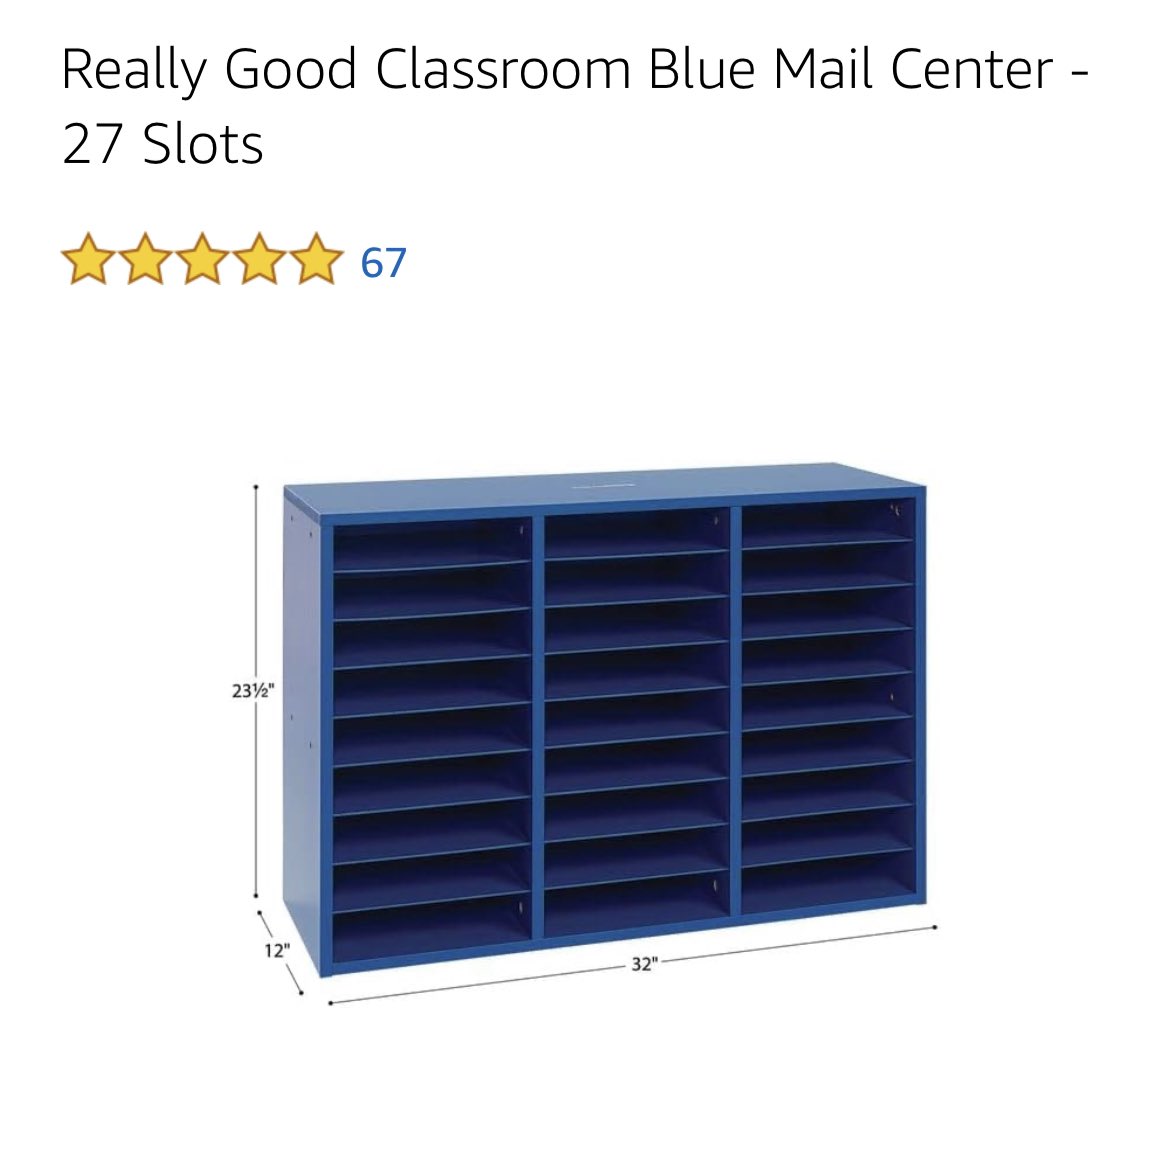 I’m just curious, do these things REALLY need to be this expensive? The one I had didn’t last. Could someone make it more sturdy and less expensive? #TeacherTwitter #ClassroomNeeds #SchoolSupplies #ClassWishList @CCISD @es_luther